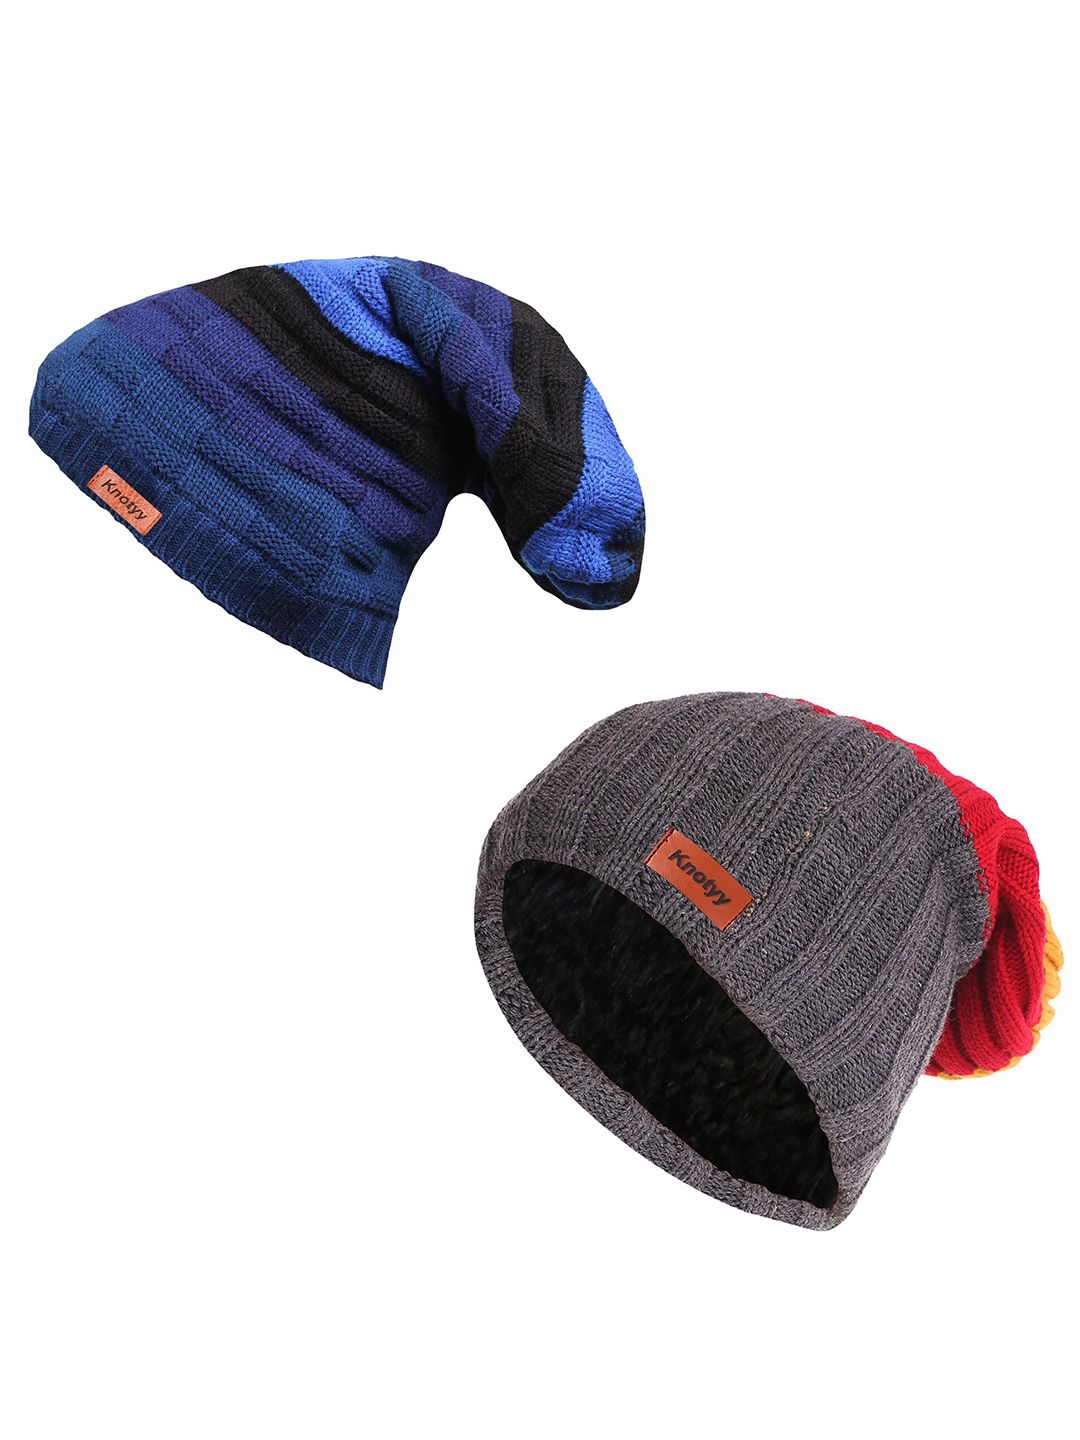 Knotyy Unisex Pack of 2 Blue & Grey Beanie Price in India